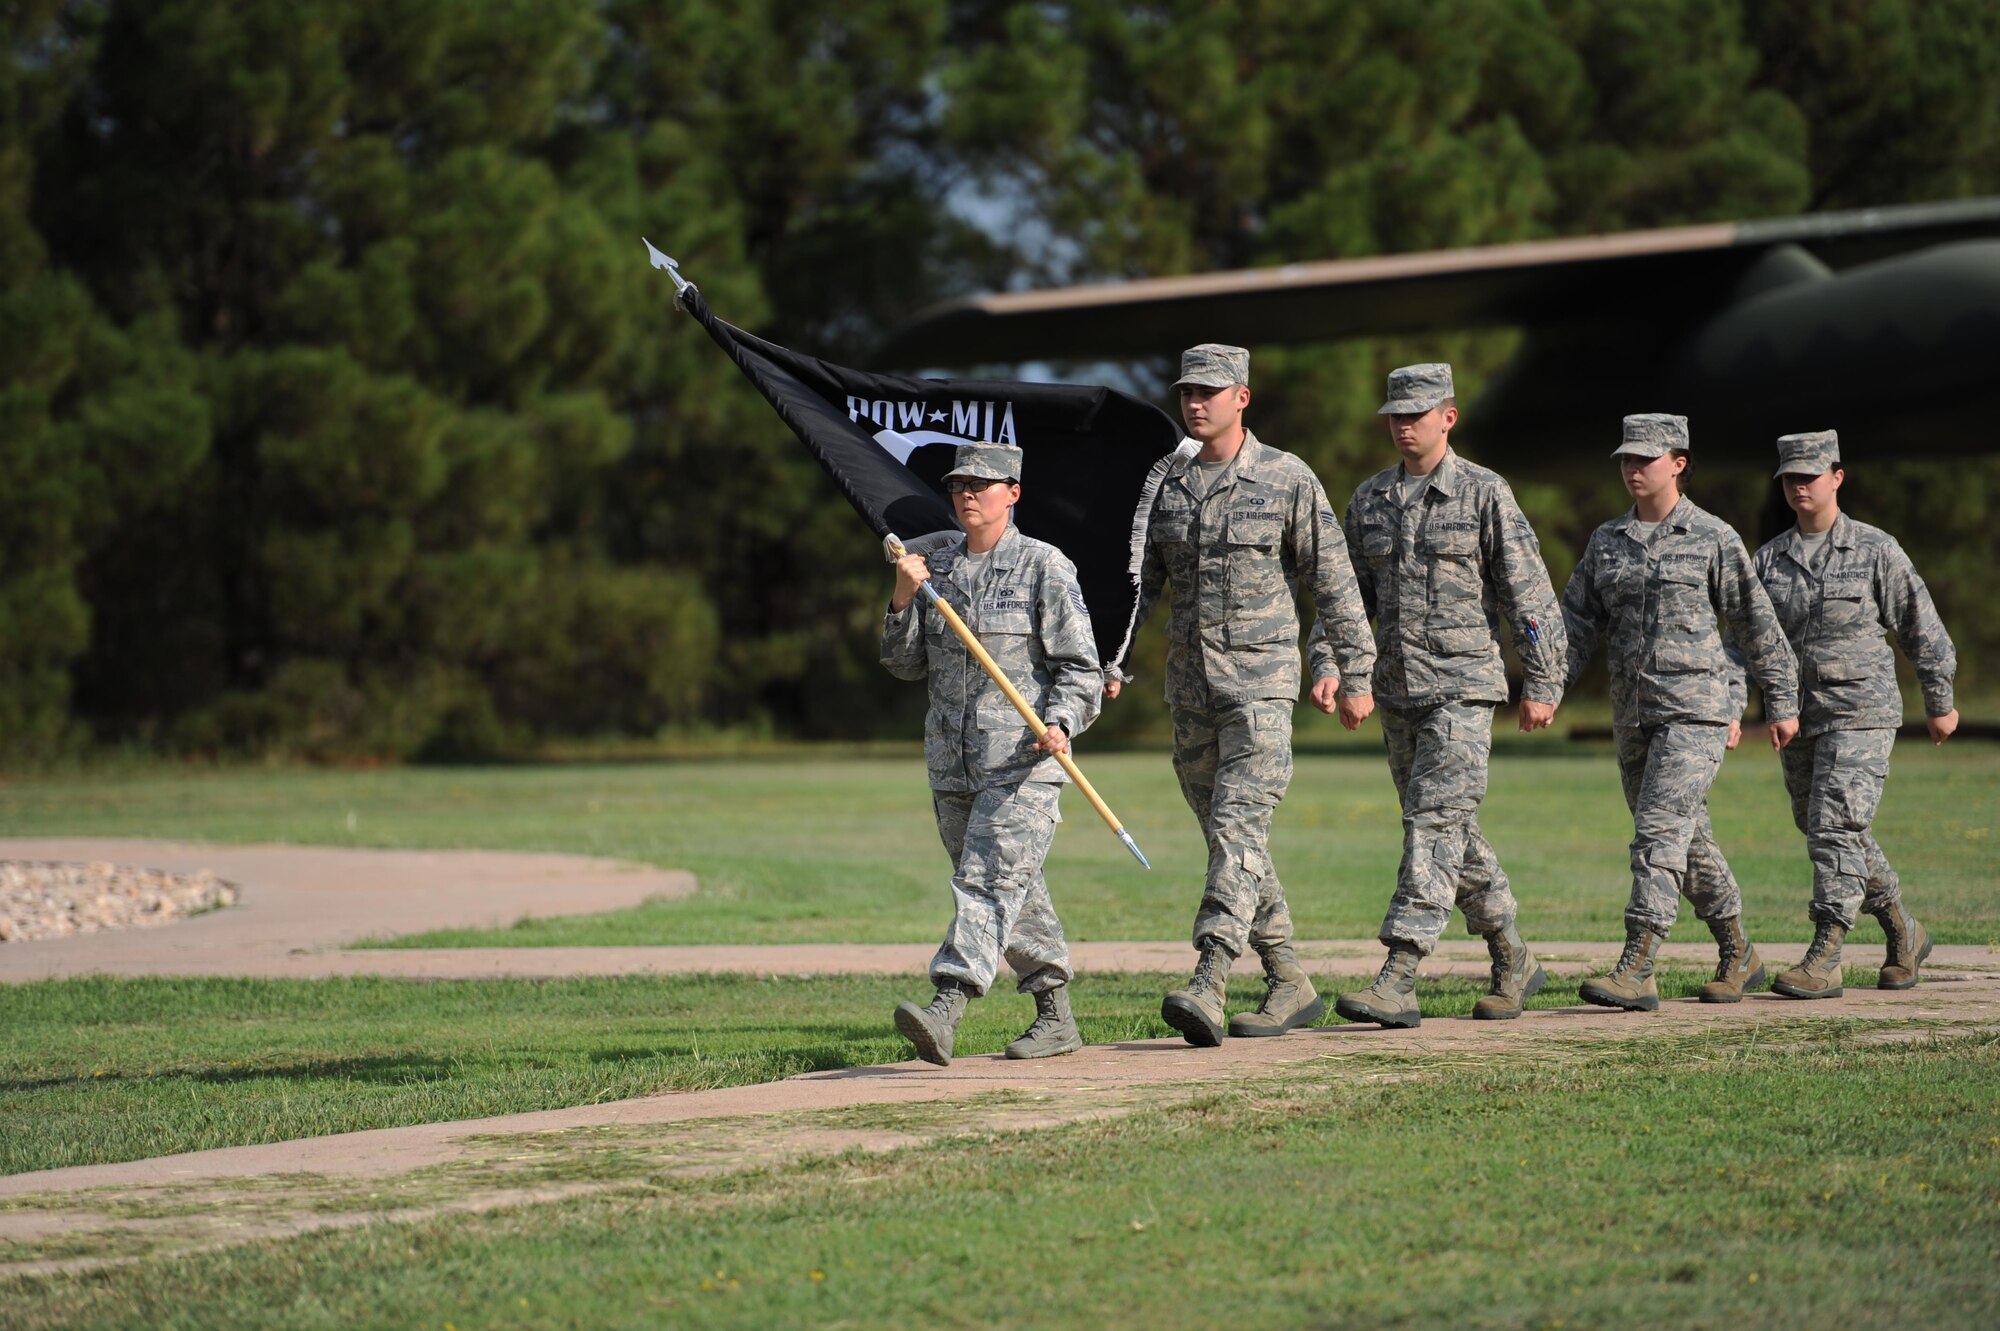 U.S. Air Force Airmen carry the prisoner-of-war/missing-in-action flag as part of the national POW/MIA recognition day, at Dyess Air Force Base, Texas, Sept. 16, 2016. The ceremony began at 7 a.m. and continued until the playing of retreat, a traditional call signifying the end of the day, at 5 p.m. (U.S. Air Force photo by Airman 1st Class Rebecca Van Syoc) 